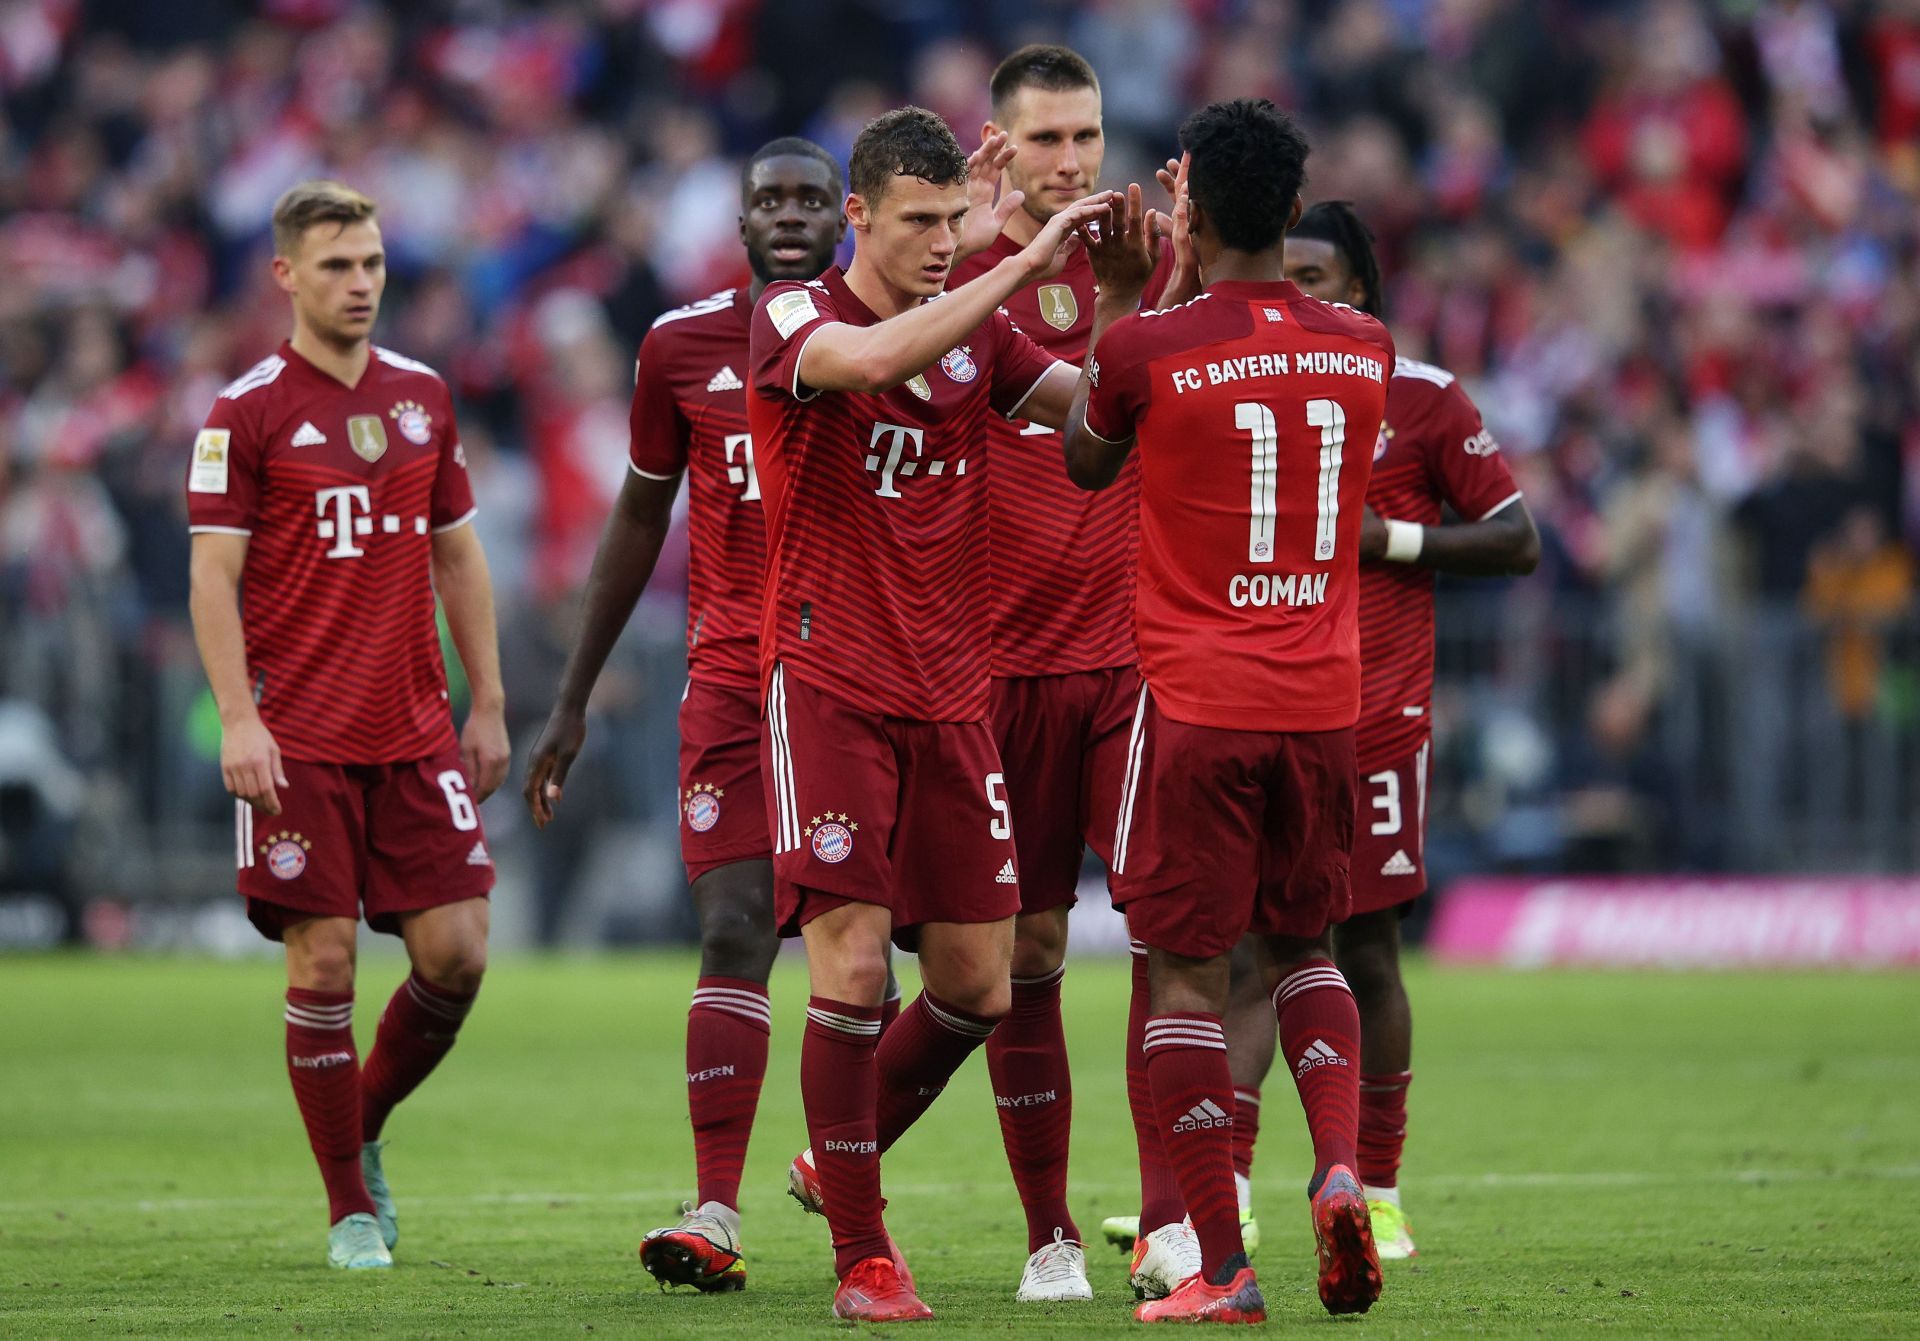 Bayern Munich will look to continue their impressive run of form